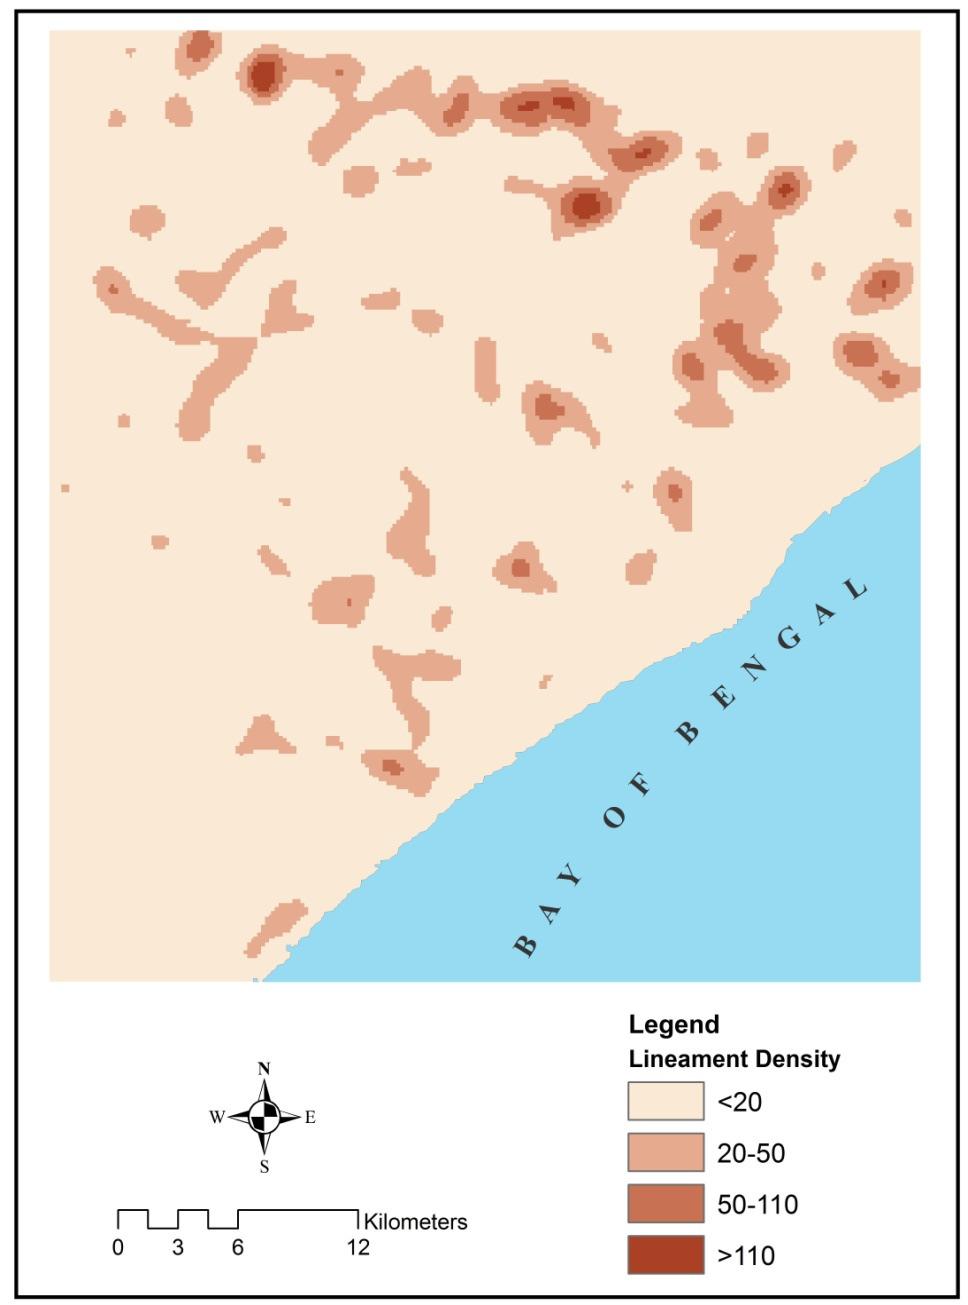 The lineament density map shows a low density in most of the area comparatively to other parts of the study area (figure 10).